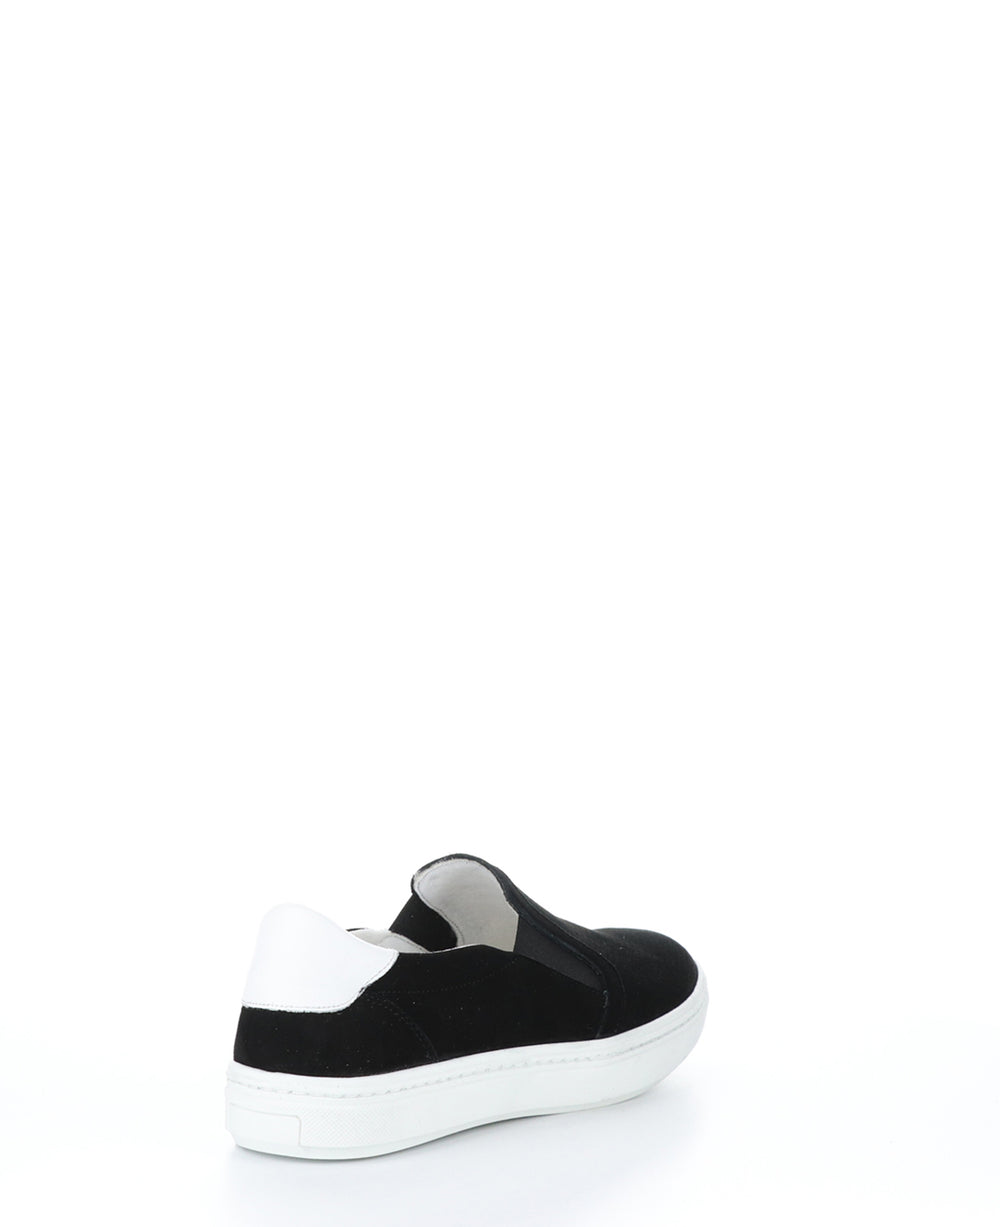 CYBILL BLACK Slip-on Shoes|CYBILL Chaussures à Enfiler in Noir|CYBILL Baskets à Enfiler in Noir